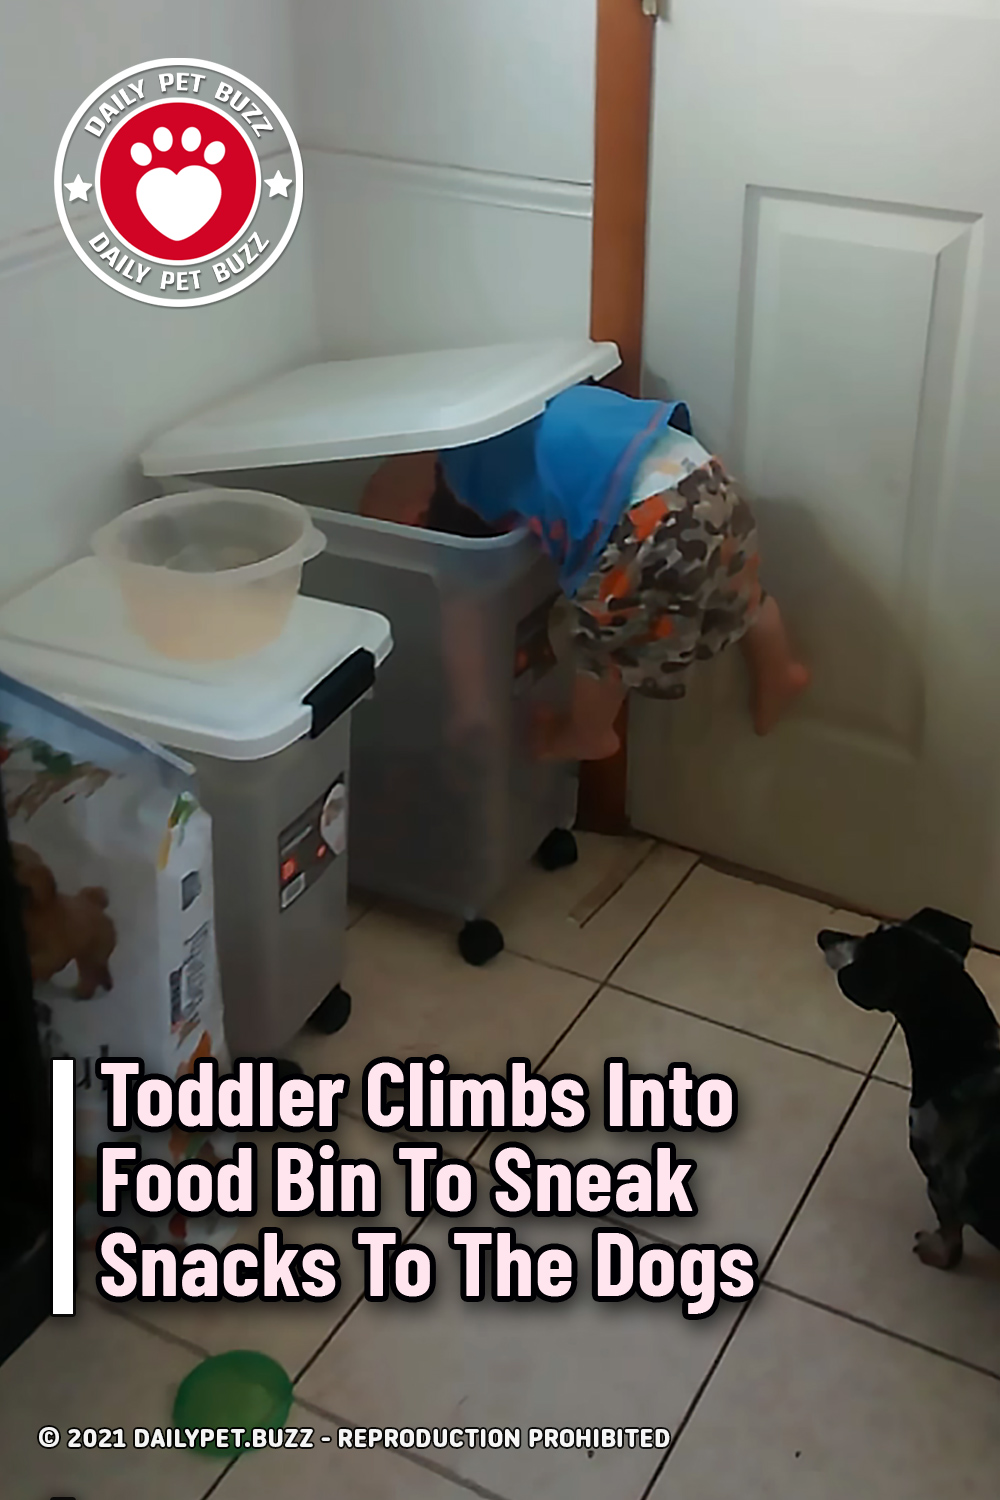 Toddler Climbs Into Food Bin To Sneak Snacks To The Dogs